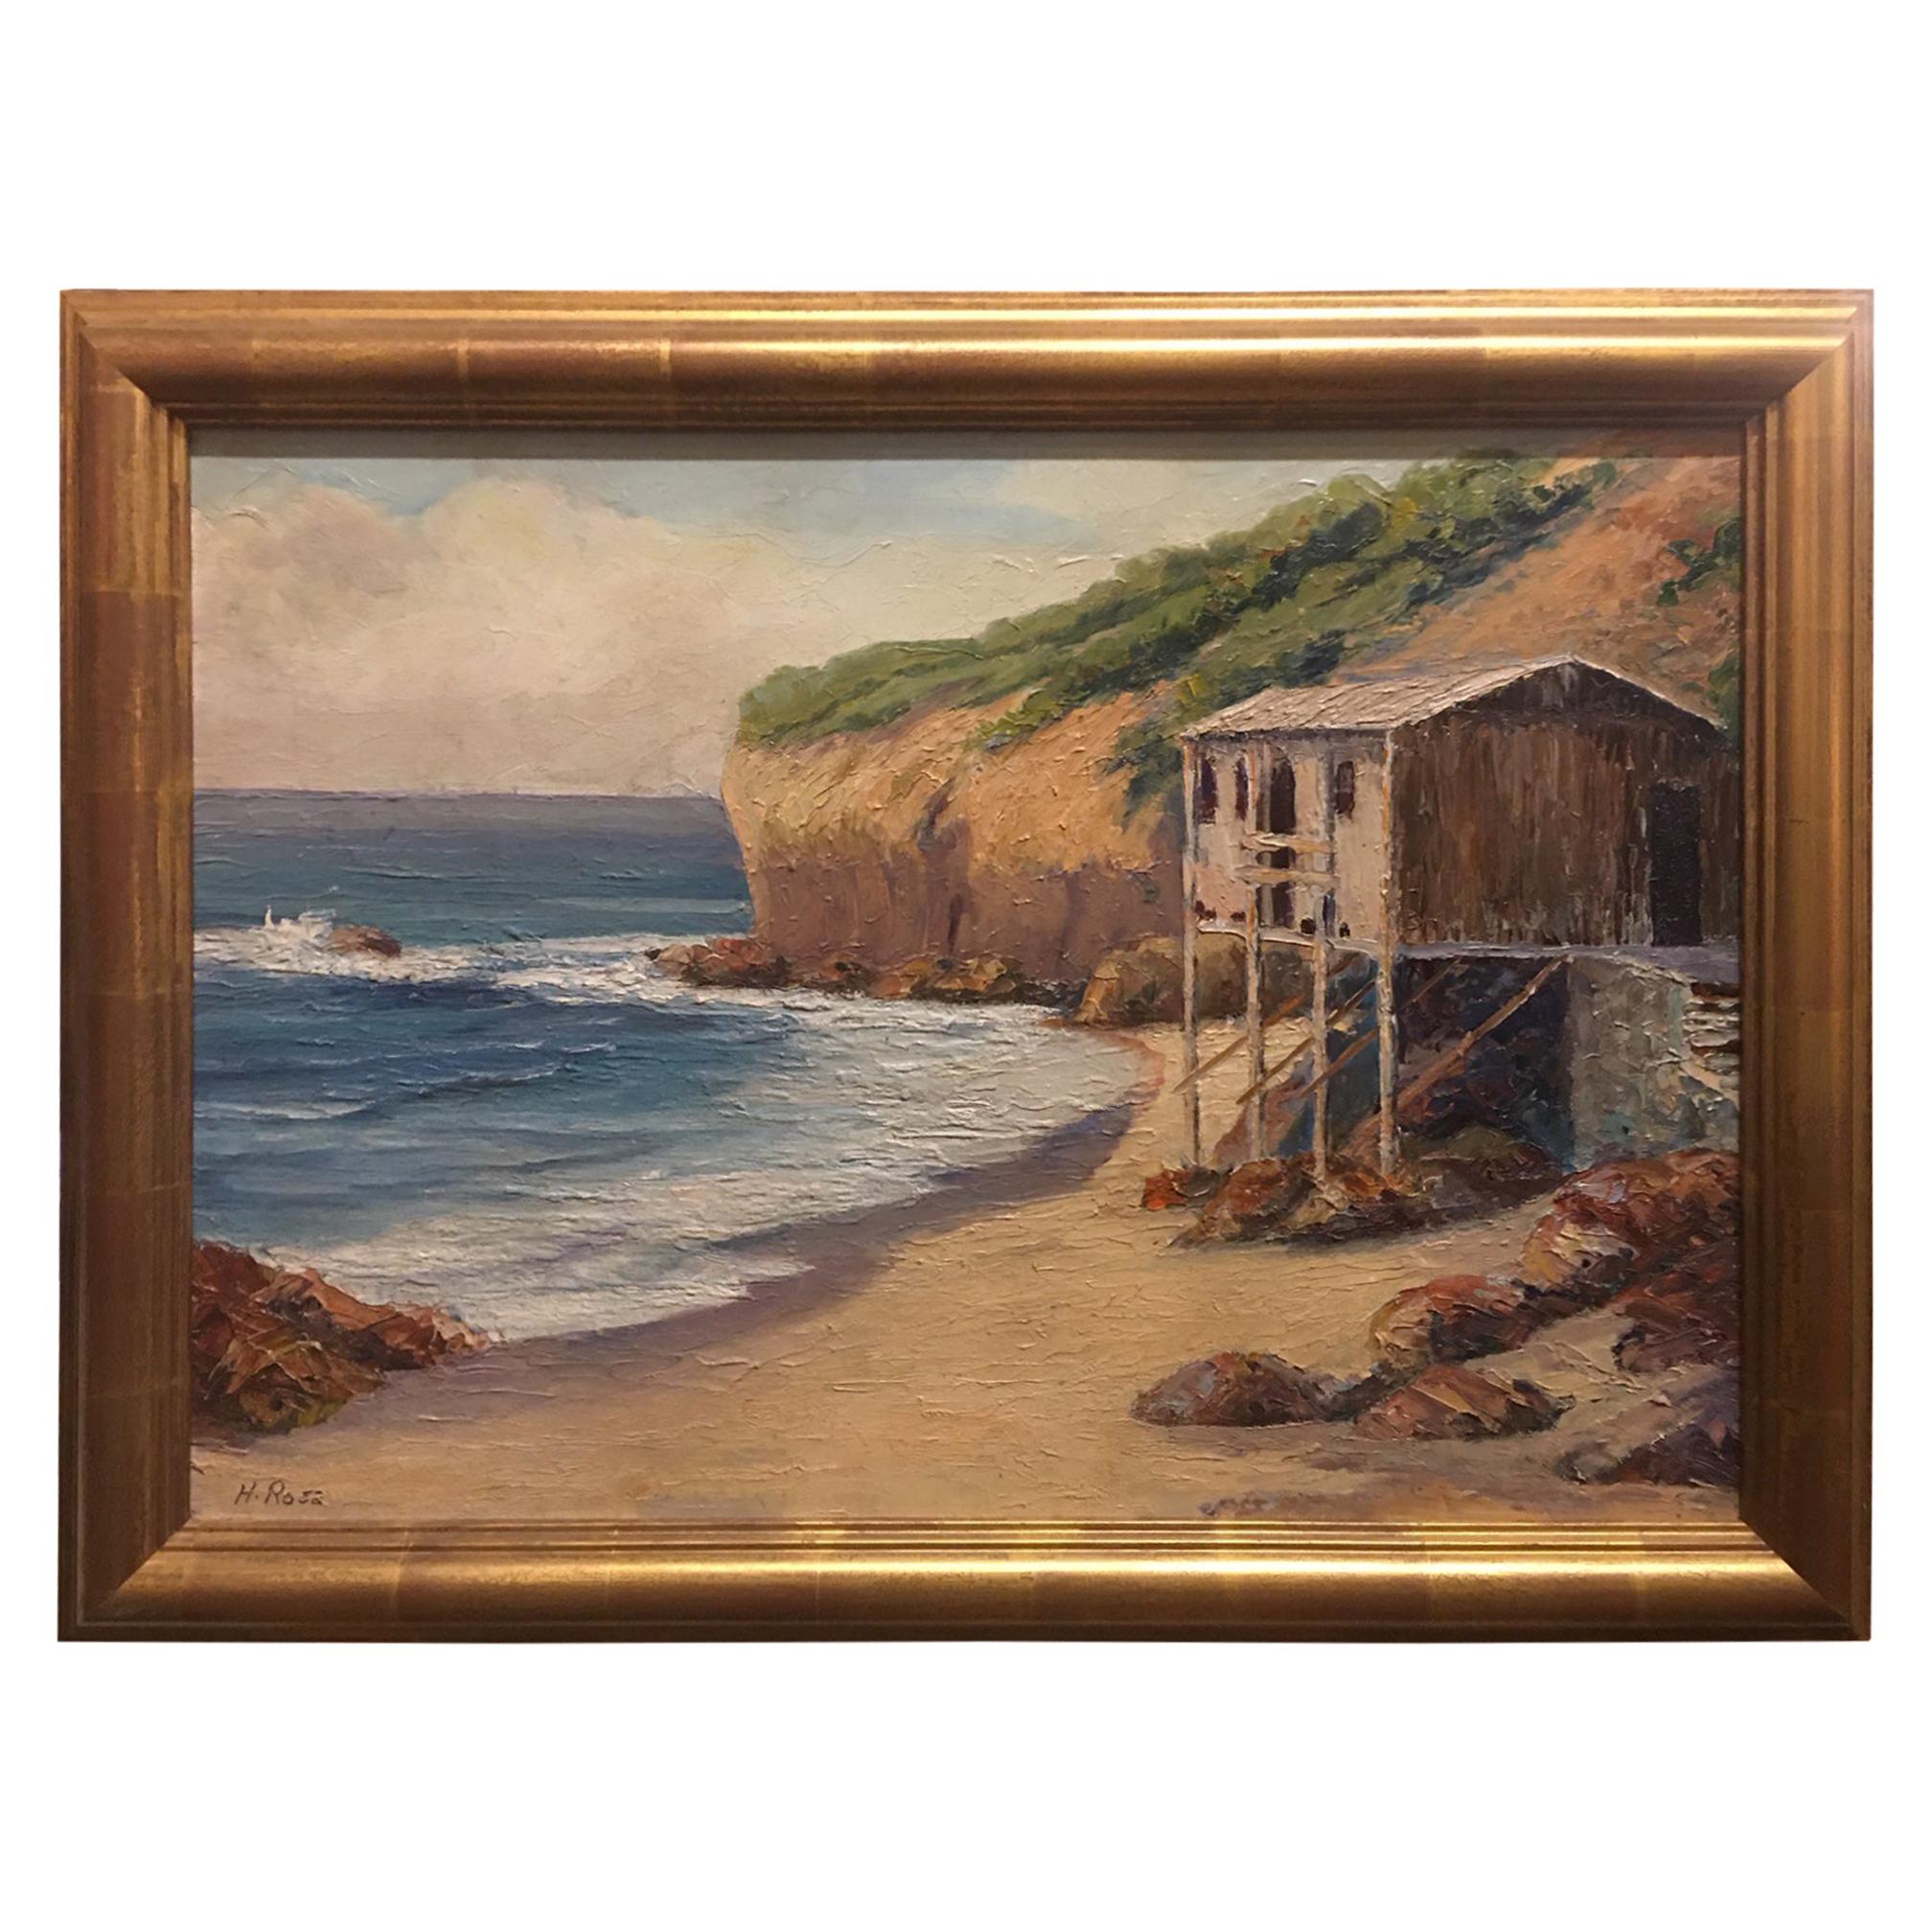 Oil Painting "Oceanscape with Beach Bungalow" Signed H. Rosa, circa 1920-1940